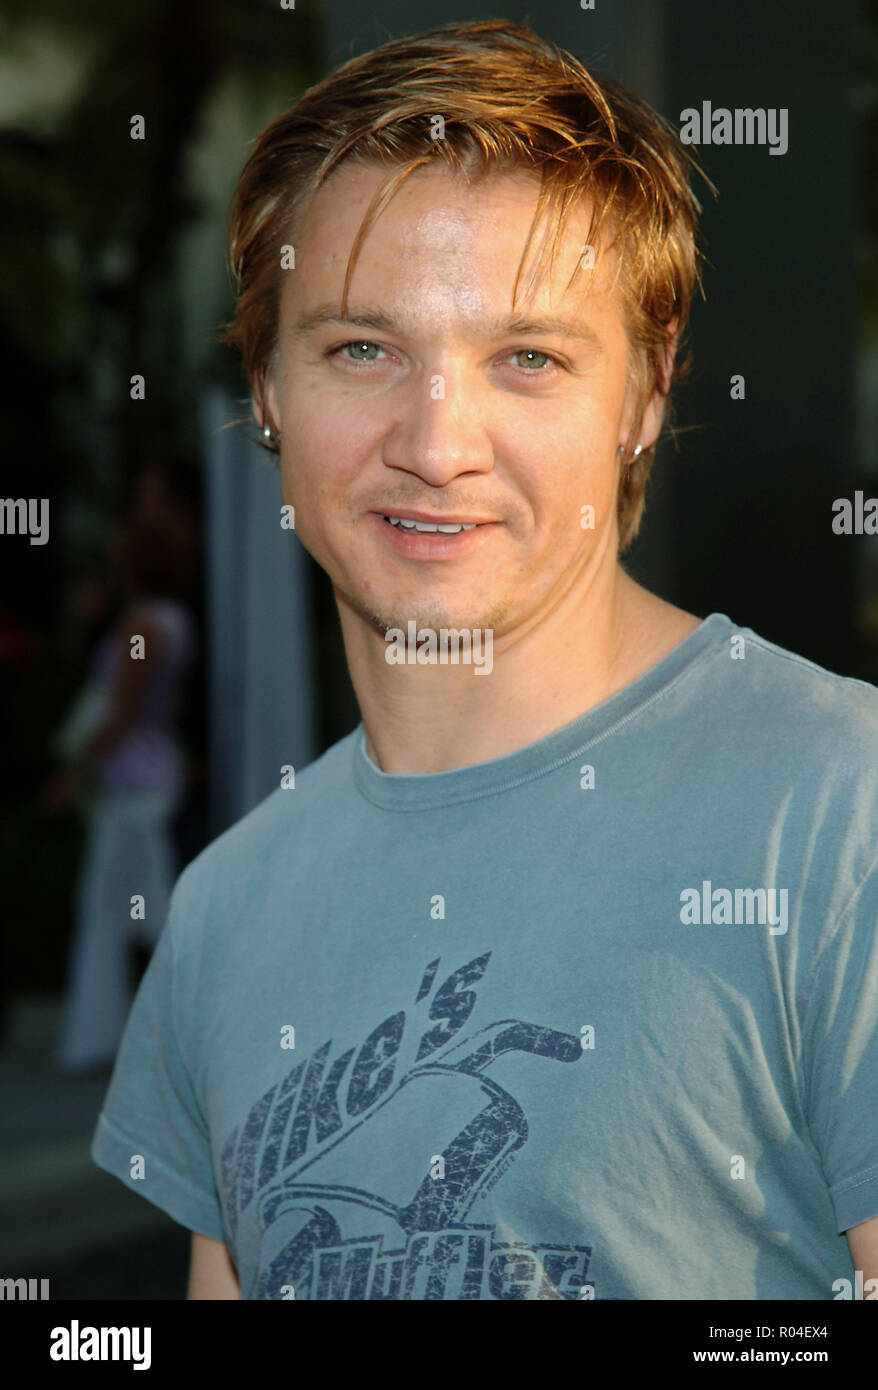 Jeremy Renner arriving at the Down In The Valley Premiere at ht e LA Film Festival Opening Night at the Arclight Theatre in Los Angeles. June 16, 2005.RennerJeremy033 Red Carpet Event, Vertical, USA, Film Industry, Celebrities,  Photography, Bestof, Arts Culture and Entertainment, Topix Celebrities fashion /  Vertical, Best of, Event in Hollywood Life - California,  Red Carpet and backstage, USA, Film Industry, Celebrities,  movie celebrities, TV celebrities, Music celebrities, Photography, Bestof, Arts Culture and Entertainment,  Topix, headshot, vertical, one person,, from the year , 2005, i Stock Photo